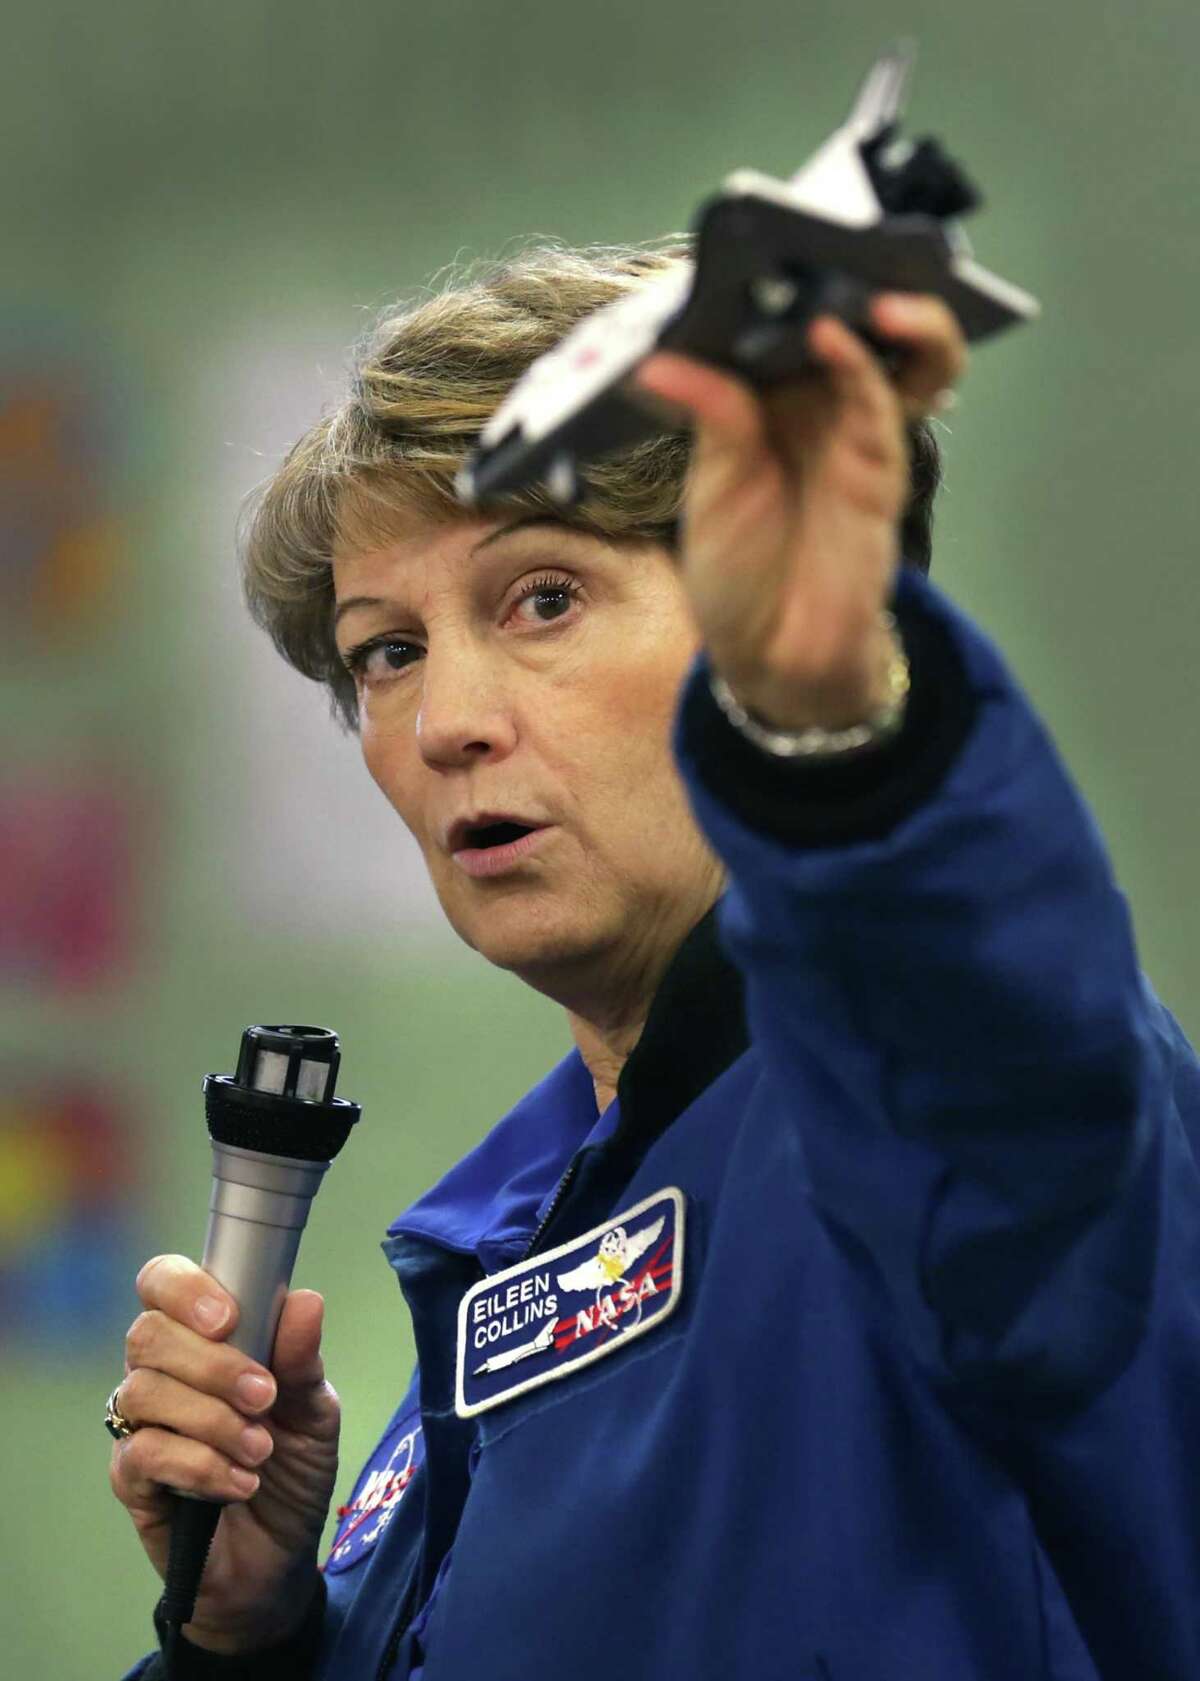 Col. Eileen Collins, NASA's first female Shuttle Commander, demonstrates with a model the flight of the Space Shuttle as she visits girls in the Space Odyssey session of Camp Metro, held by West Side Girl Scout Leadership Center on Thursday, July 25, 2019.